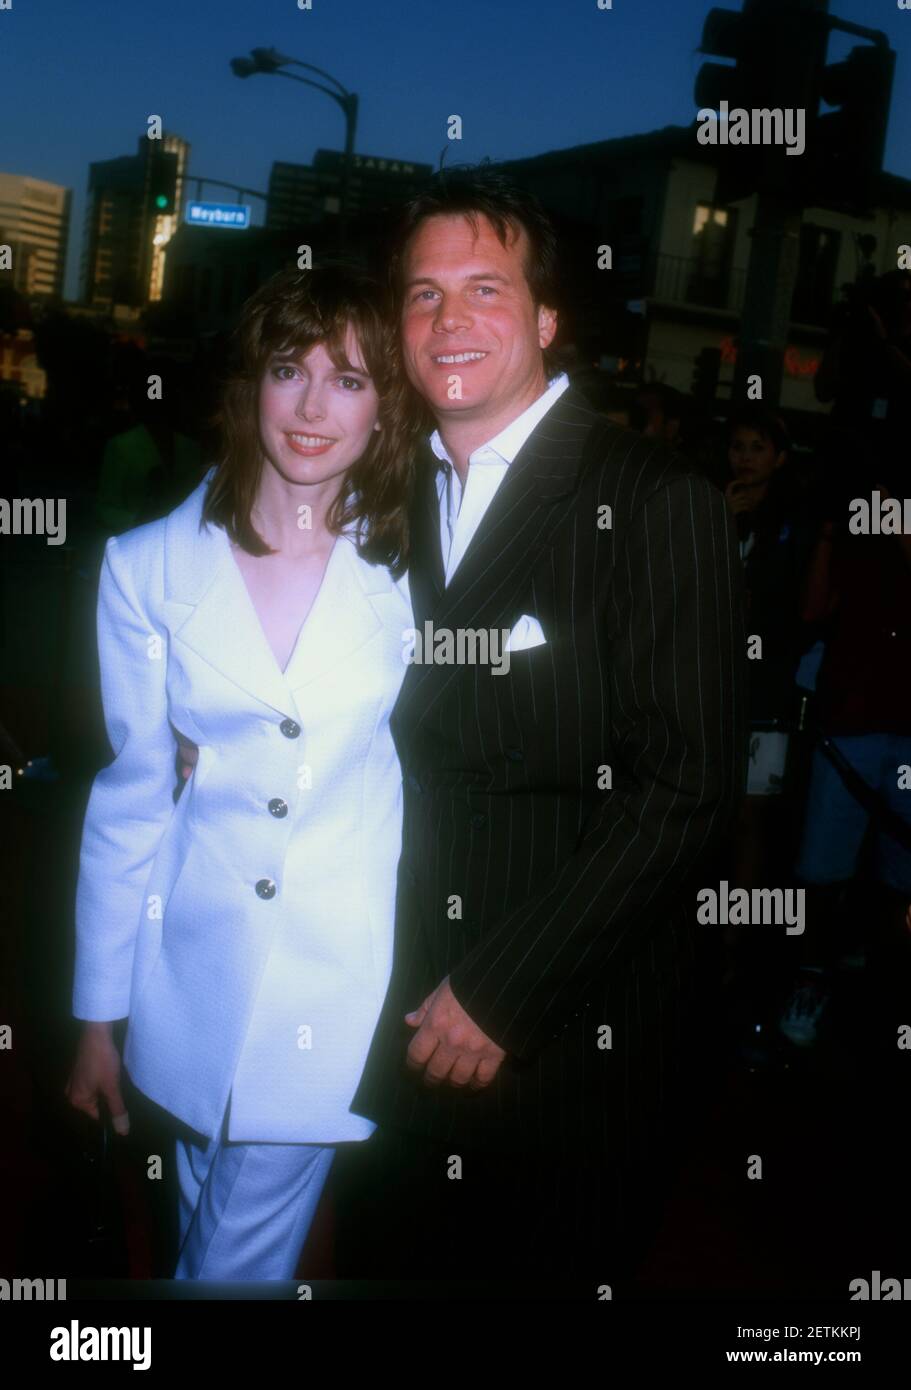 Westwood, California, USA 8th May 1996 Actor Bill Paxton and wife Louise Paxton attend Warner Bros. Pictures 'Twister' Premiere on May 8, 1996 at Mann Village Theatre in Westwood, California, USA. Photo by Barry King/Alamy Stock Photo Stock Photo